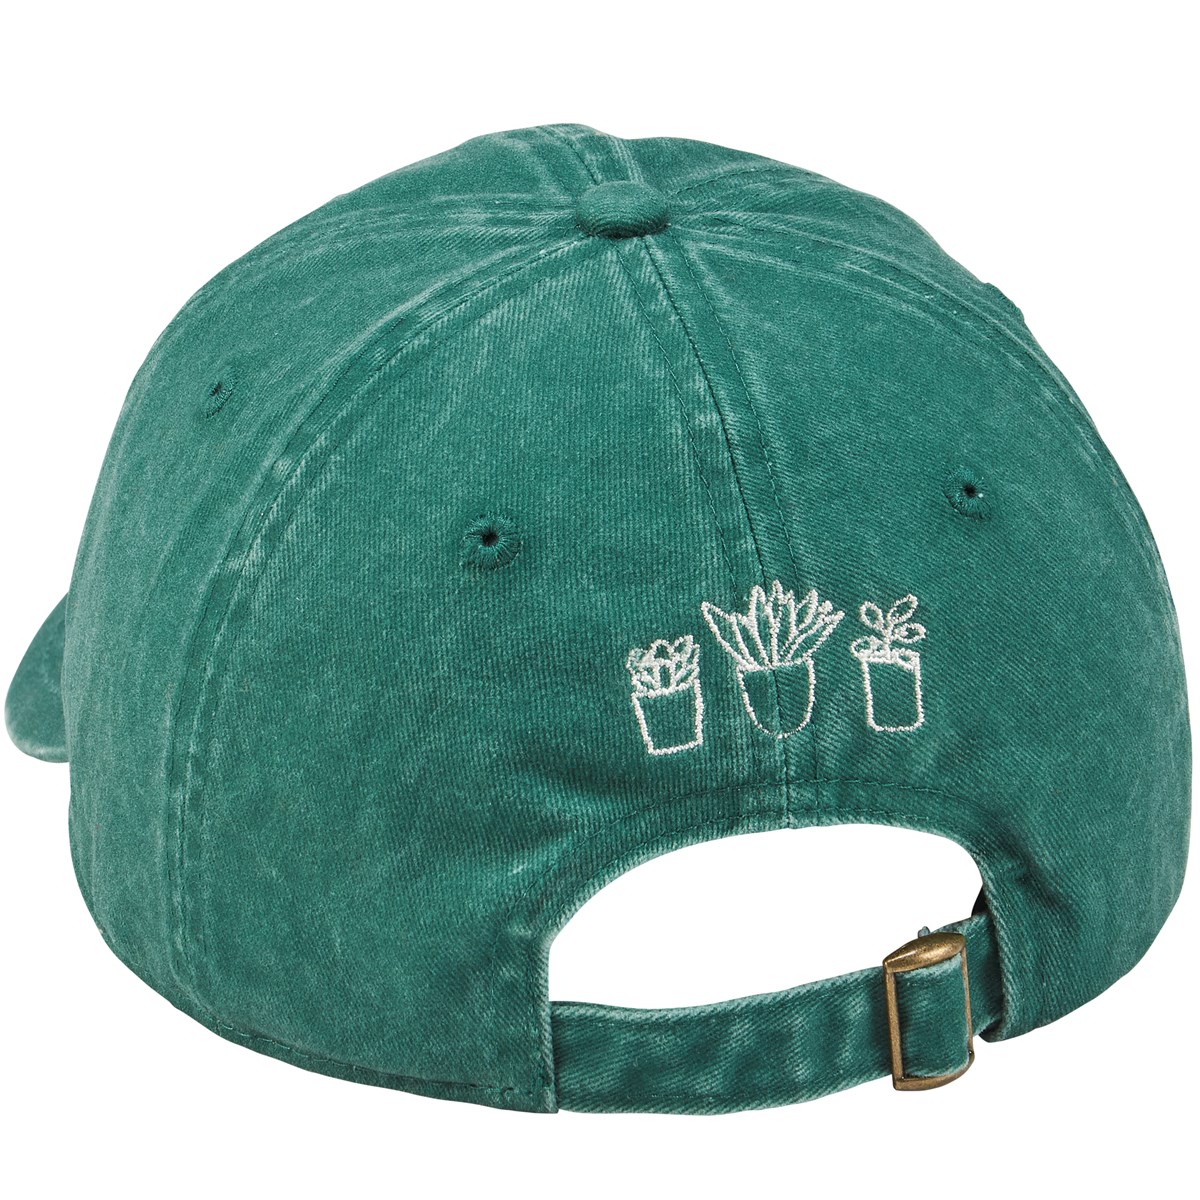 Distracted By Plants Baseball Cap - Cotton, Metal